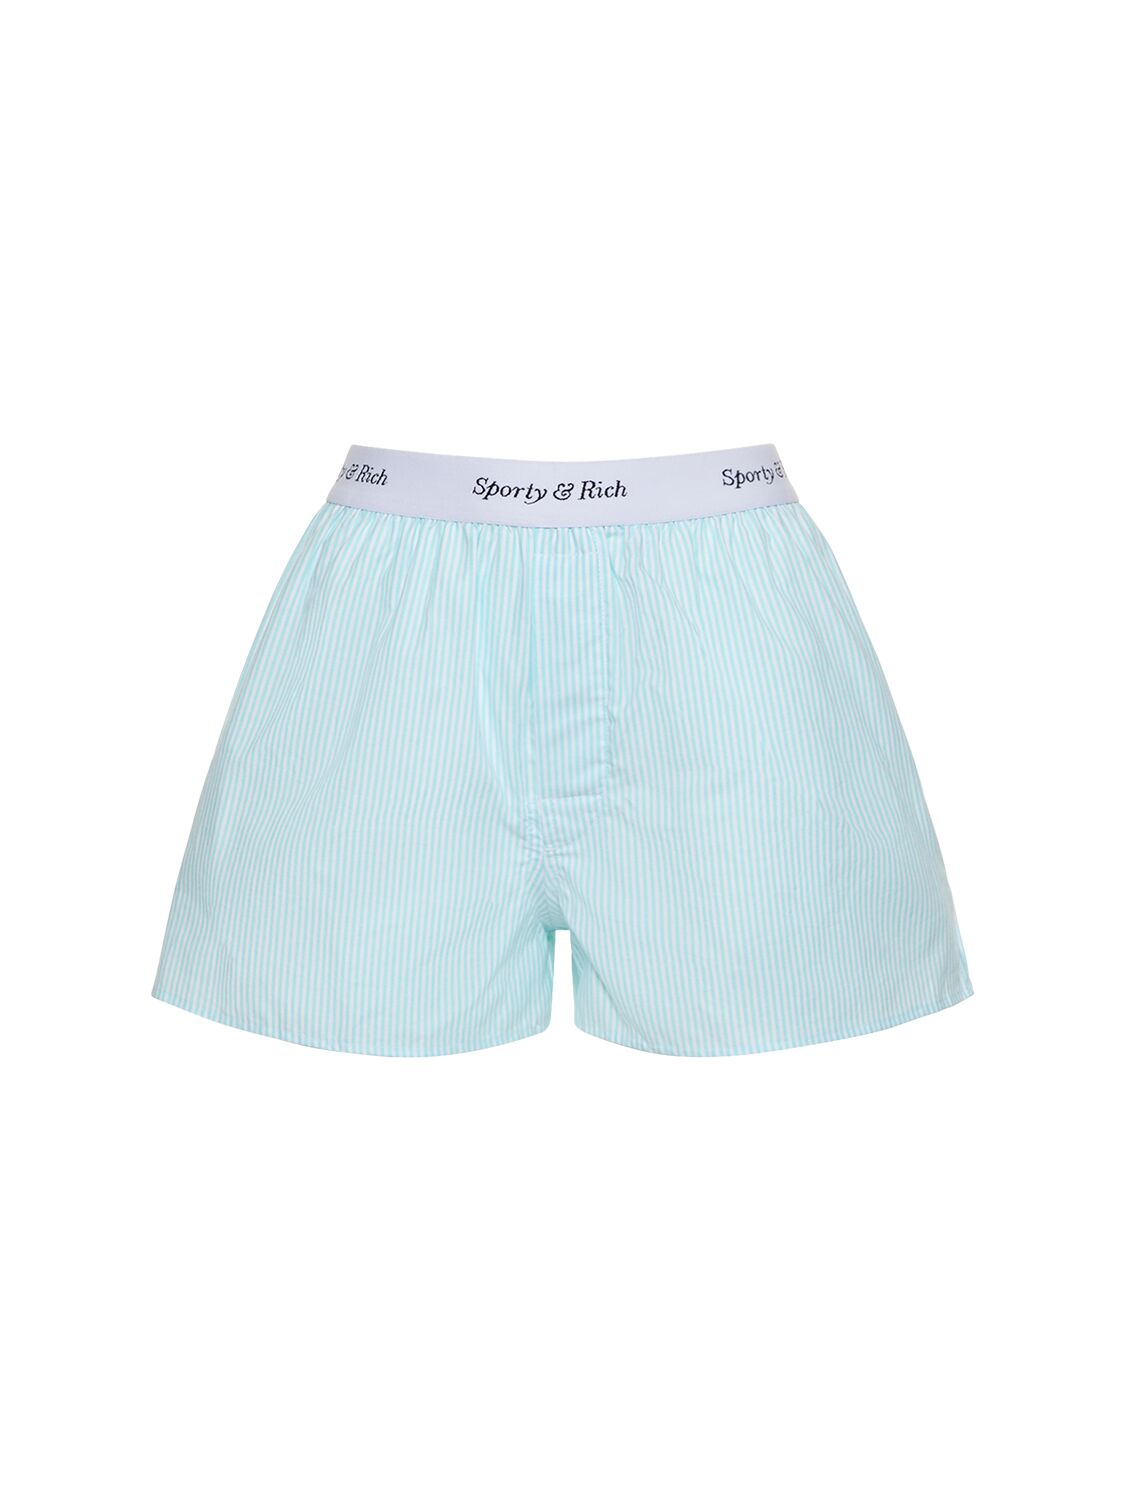 Sporty And Rich Boxer Shorts In Light Blue